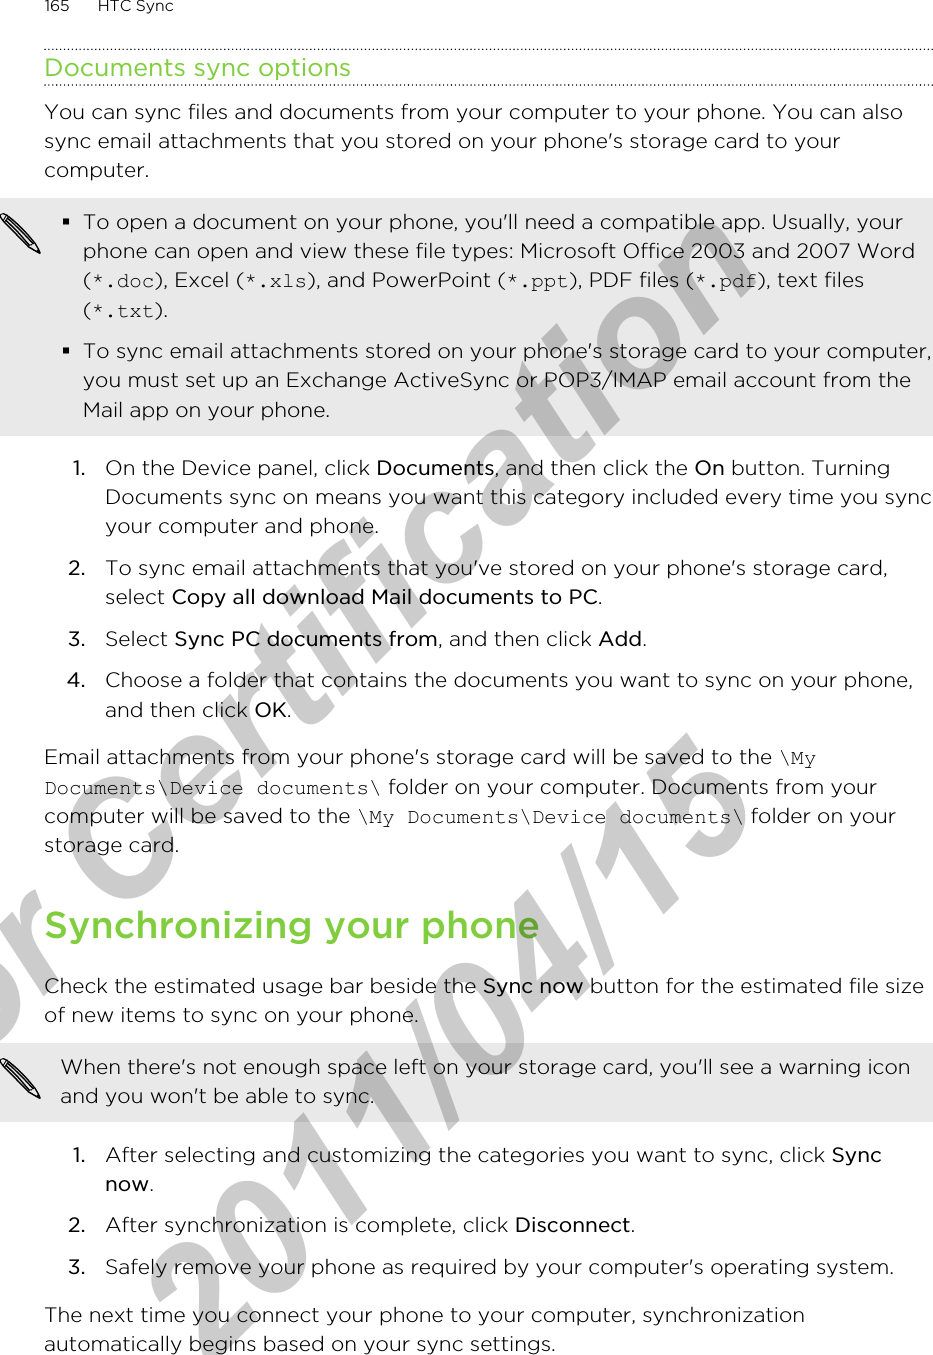 Documents sync optionsYou can sync files and documents from your computer to your phone. You can alsosync email attachments that you stored on your phone&apos;s storage card to yourcomputer.§To open a document on your phone, you&apos;ll need a compatible app. Usually, yourphone can open and view these file types: Microsoft Office 2003 and 2007 Word(*.doc), Excel (*.xls), and PowerPoint (*.ppt), PDF files (*.pdf), text files(*.txt).§To sync email attachments stored on your phone&apos;s storage card to your computer,you must set up an Exchange ActiveSync or POP3/IMAP email account from theMail app on your phone.1. On the Device panel, click Documents, and then click the On button. TurningDocuments sync on means you want this category included every time you syncyour computer and phone.2. To sync email attachments that you&apos;ve stored on your phone&apos;s storage card,select Copy all download Mail documents to PC. 3. Select Sync PC documents from, and then click Add.4. Choose a folder that contains the documents you want to sync on your phone,and then click OK.Email attachments from your phone&apos;s storage card will be saved to the \MyDocuments\Device documents\ folder on your computer. Documents from yourcomputer will be saved to the \My Documents\Device documents\ folder on yourstorage card.Synchronizing your phoneCheck the estimated usage bar beside the Sync now button for the estimated file sizeof new items to sync on your phone.When there&apos;s not enough space left on your storage card, you&apos;ll see a warning iconand you won&apos;t be able to sync.1. After selecting and customizing the categories you want to sync, click Syncnow.2. After synchronization is complete, click Disconnect.3. Safely remove your phone as required by your computer&apos;s operating system.The next time you connect your phone to your computer, synchronizationautomatically begins based on your sync settings.165 HTC Syncfor Certification  2011/04/15